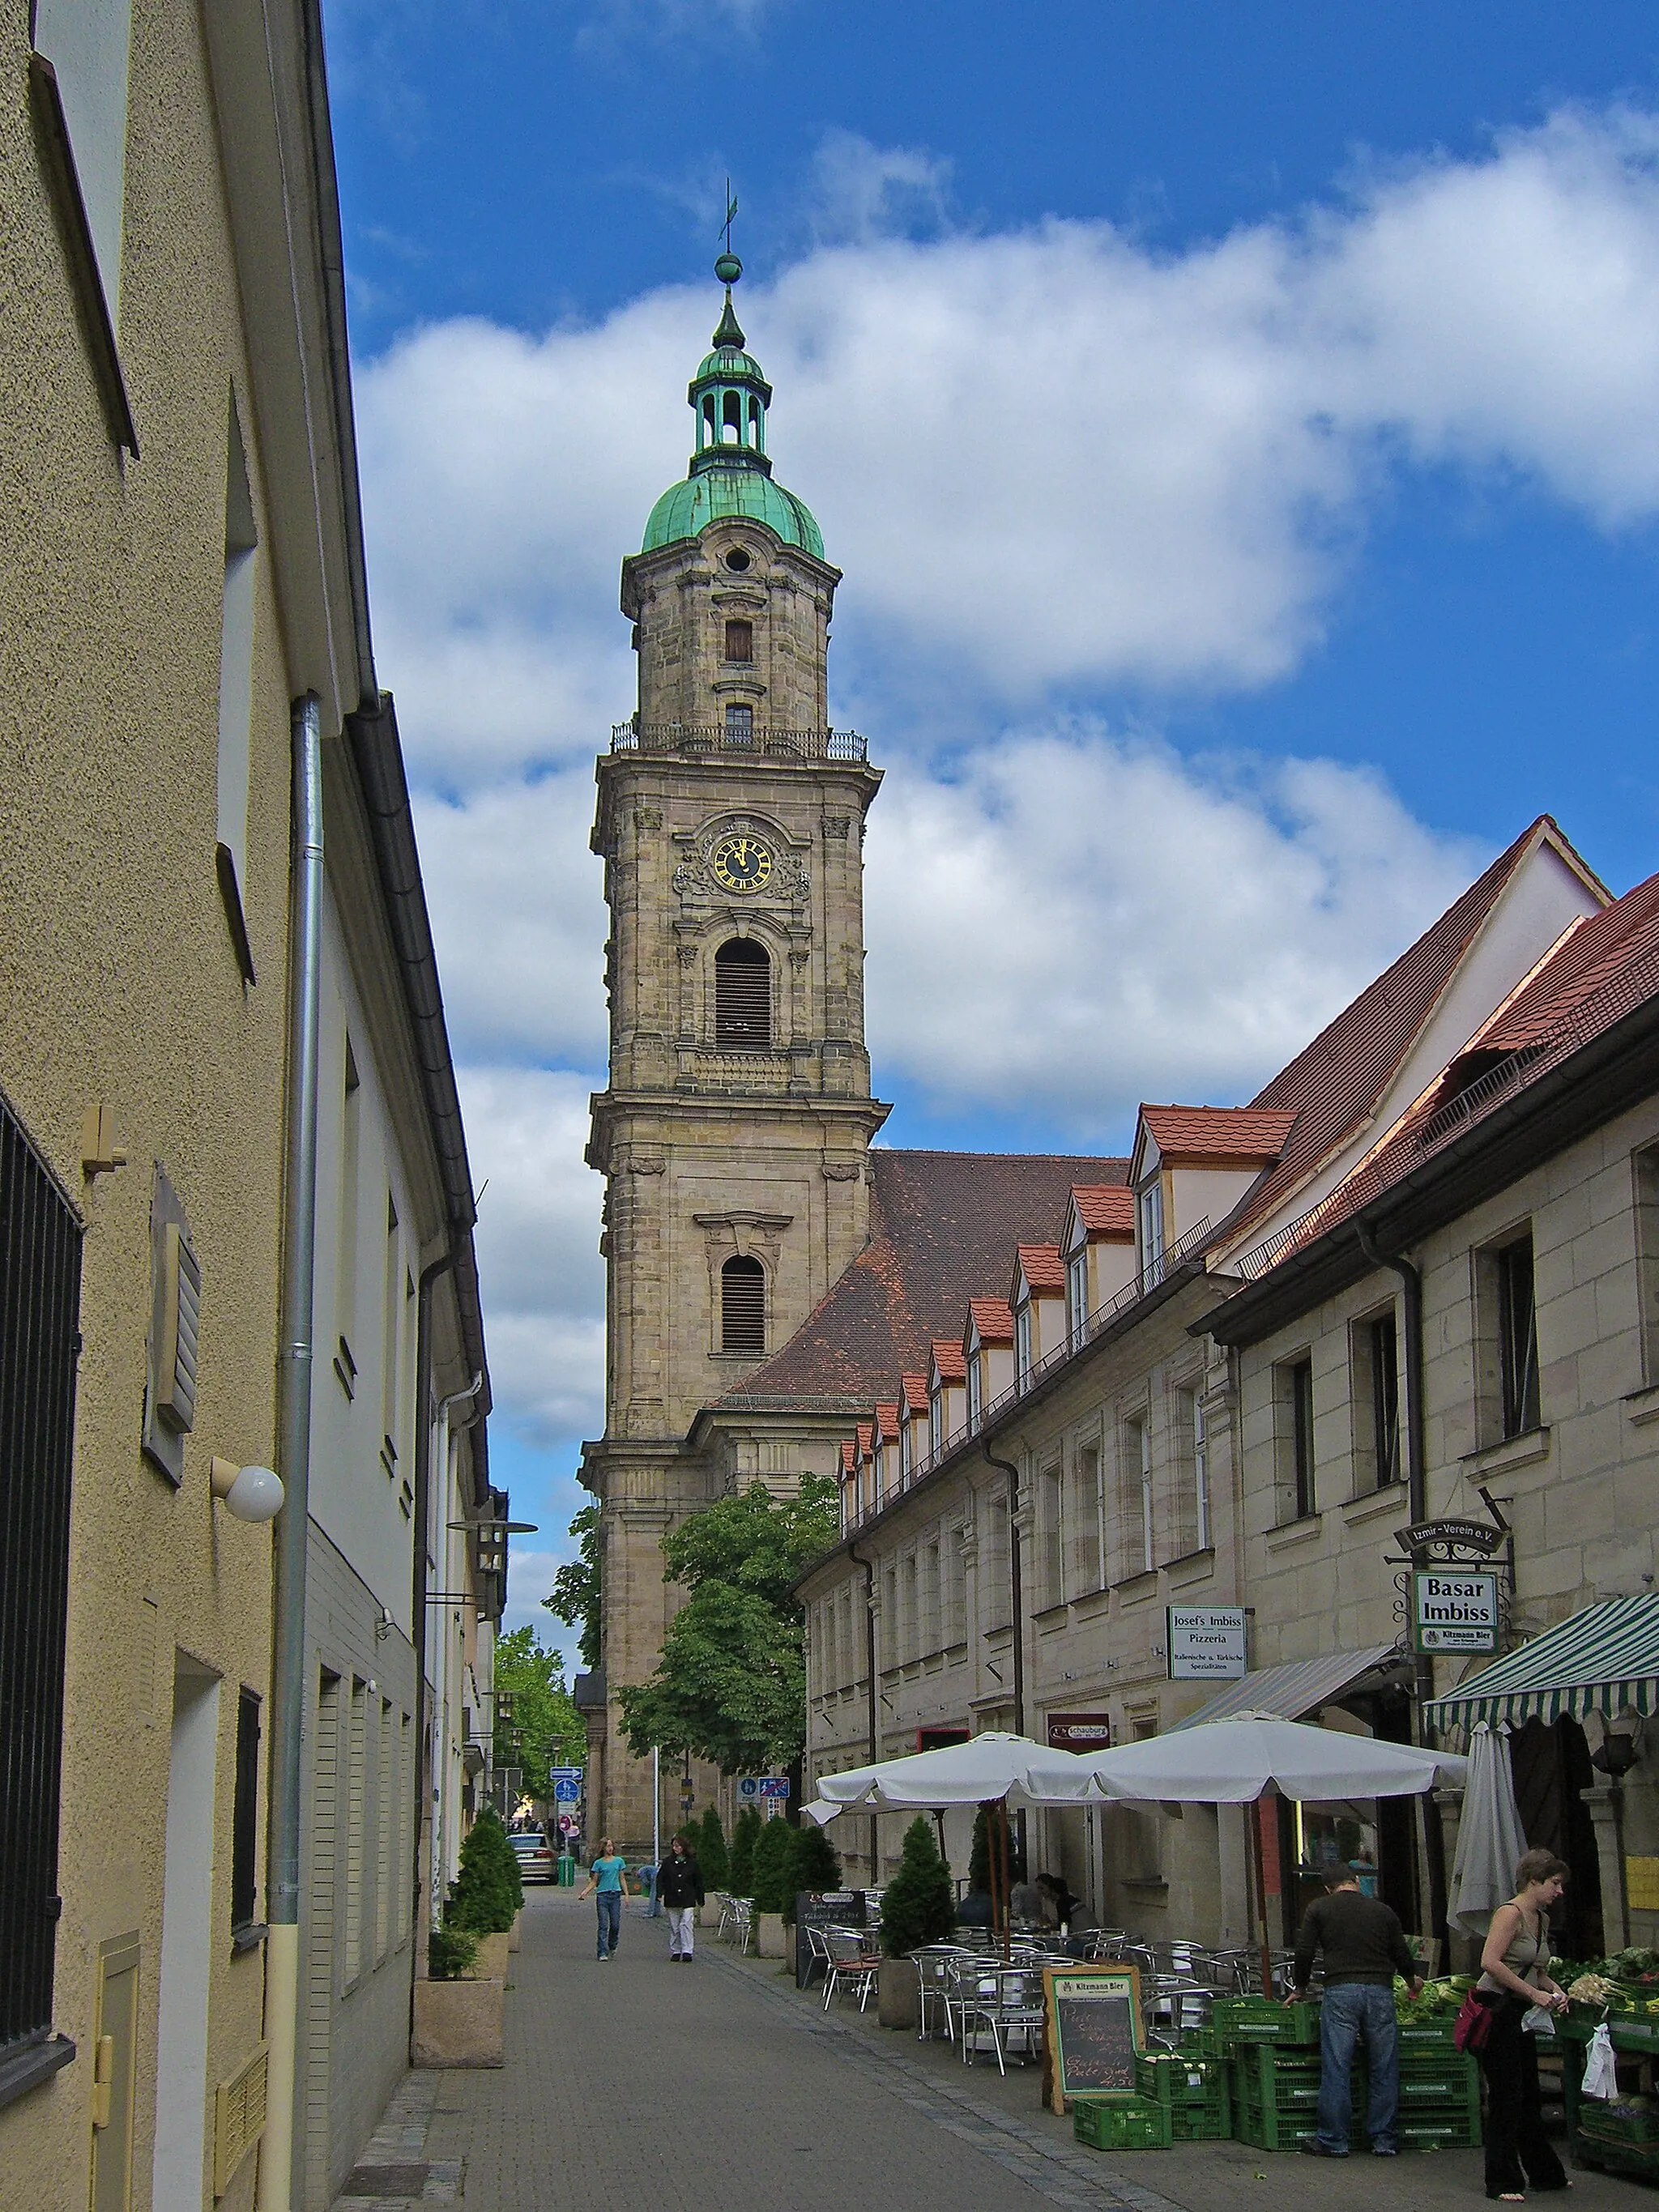 Photo showing: The tower of the Neustädter Kirche (New Town Church) viewed from the Kammererstraße (Kammerer street) in Erlangen, Germany.